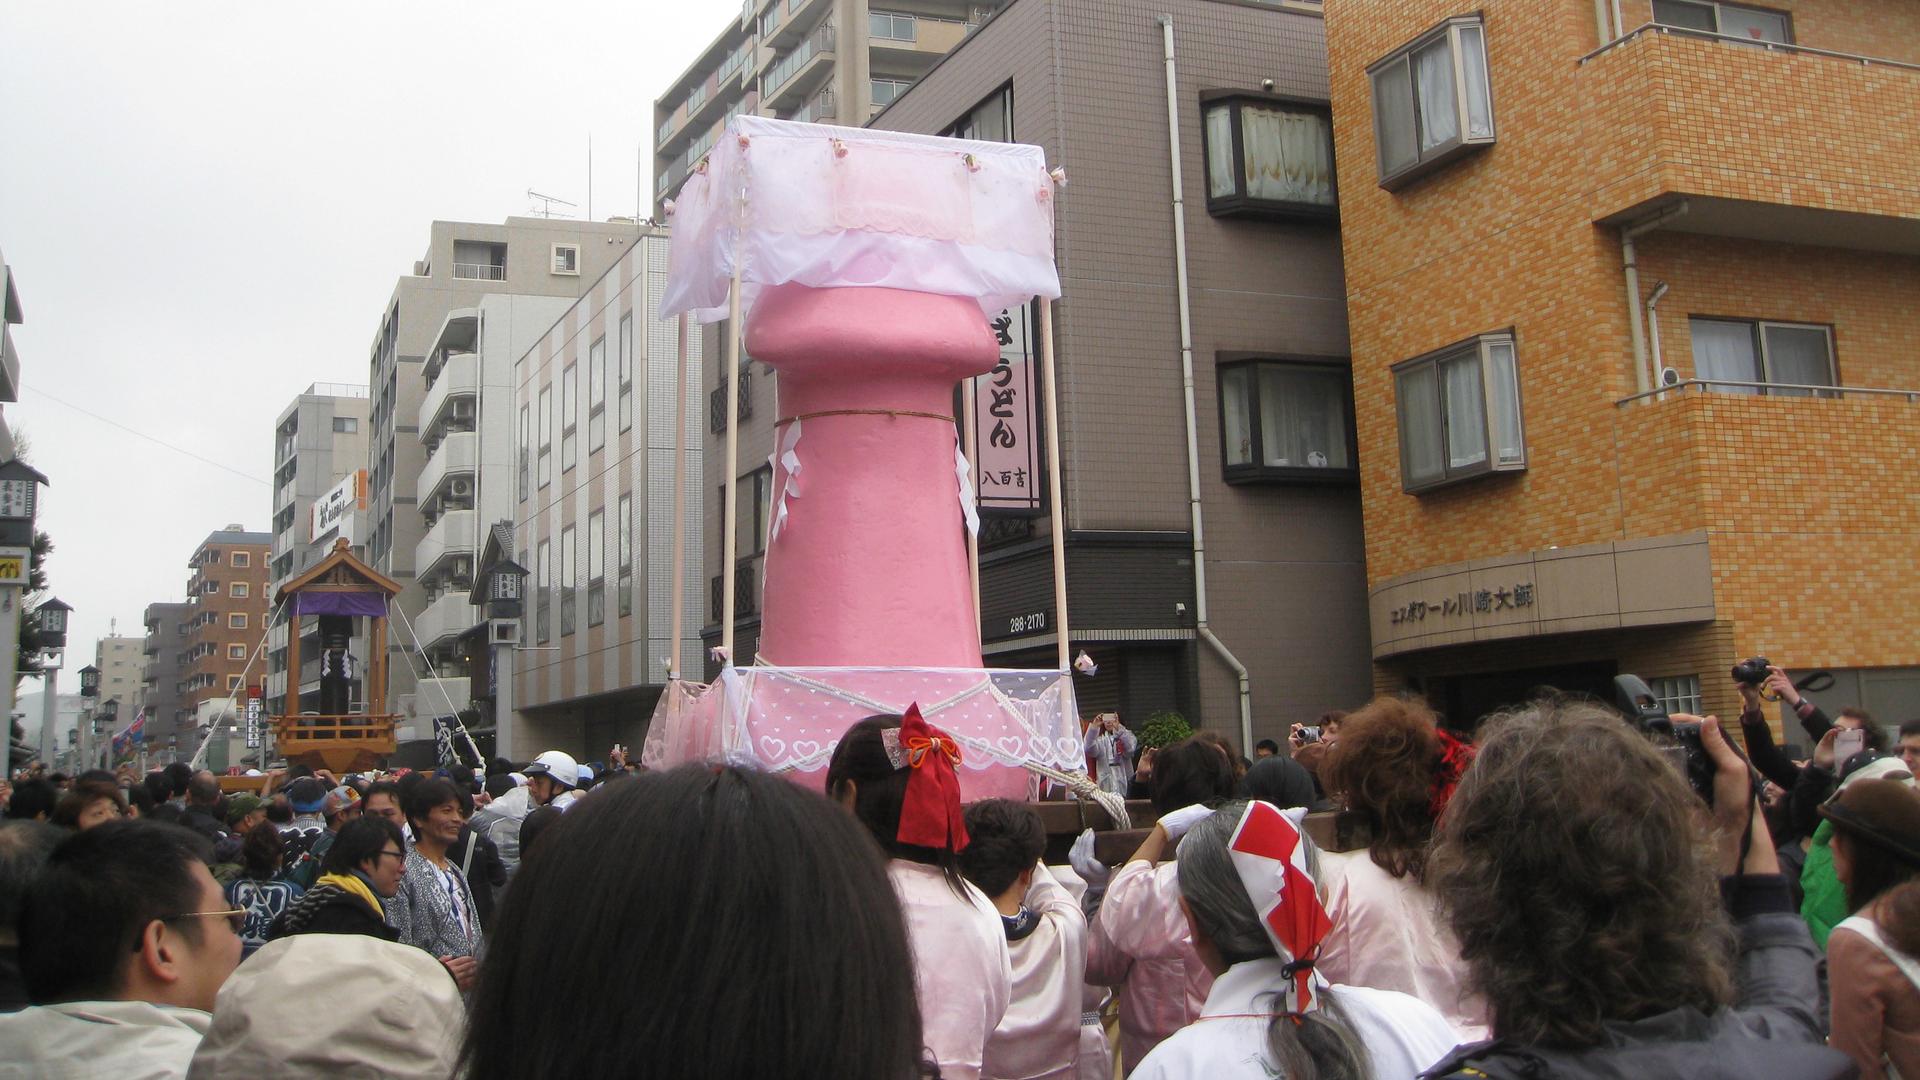 Nothing says "festival" in Japan like a large pink phallus parading through the streets.